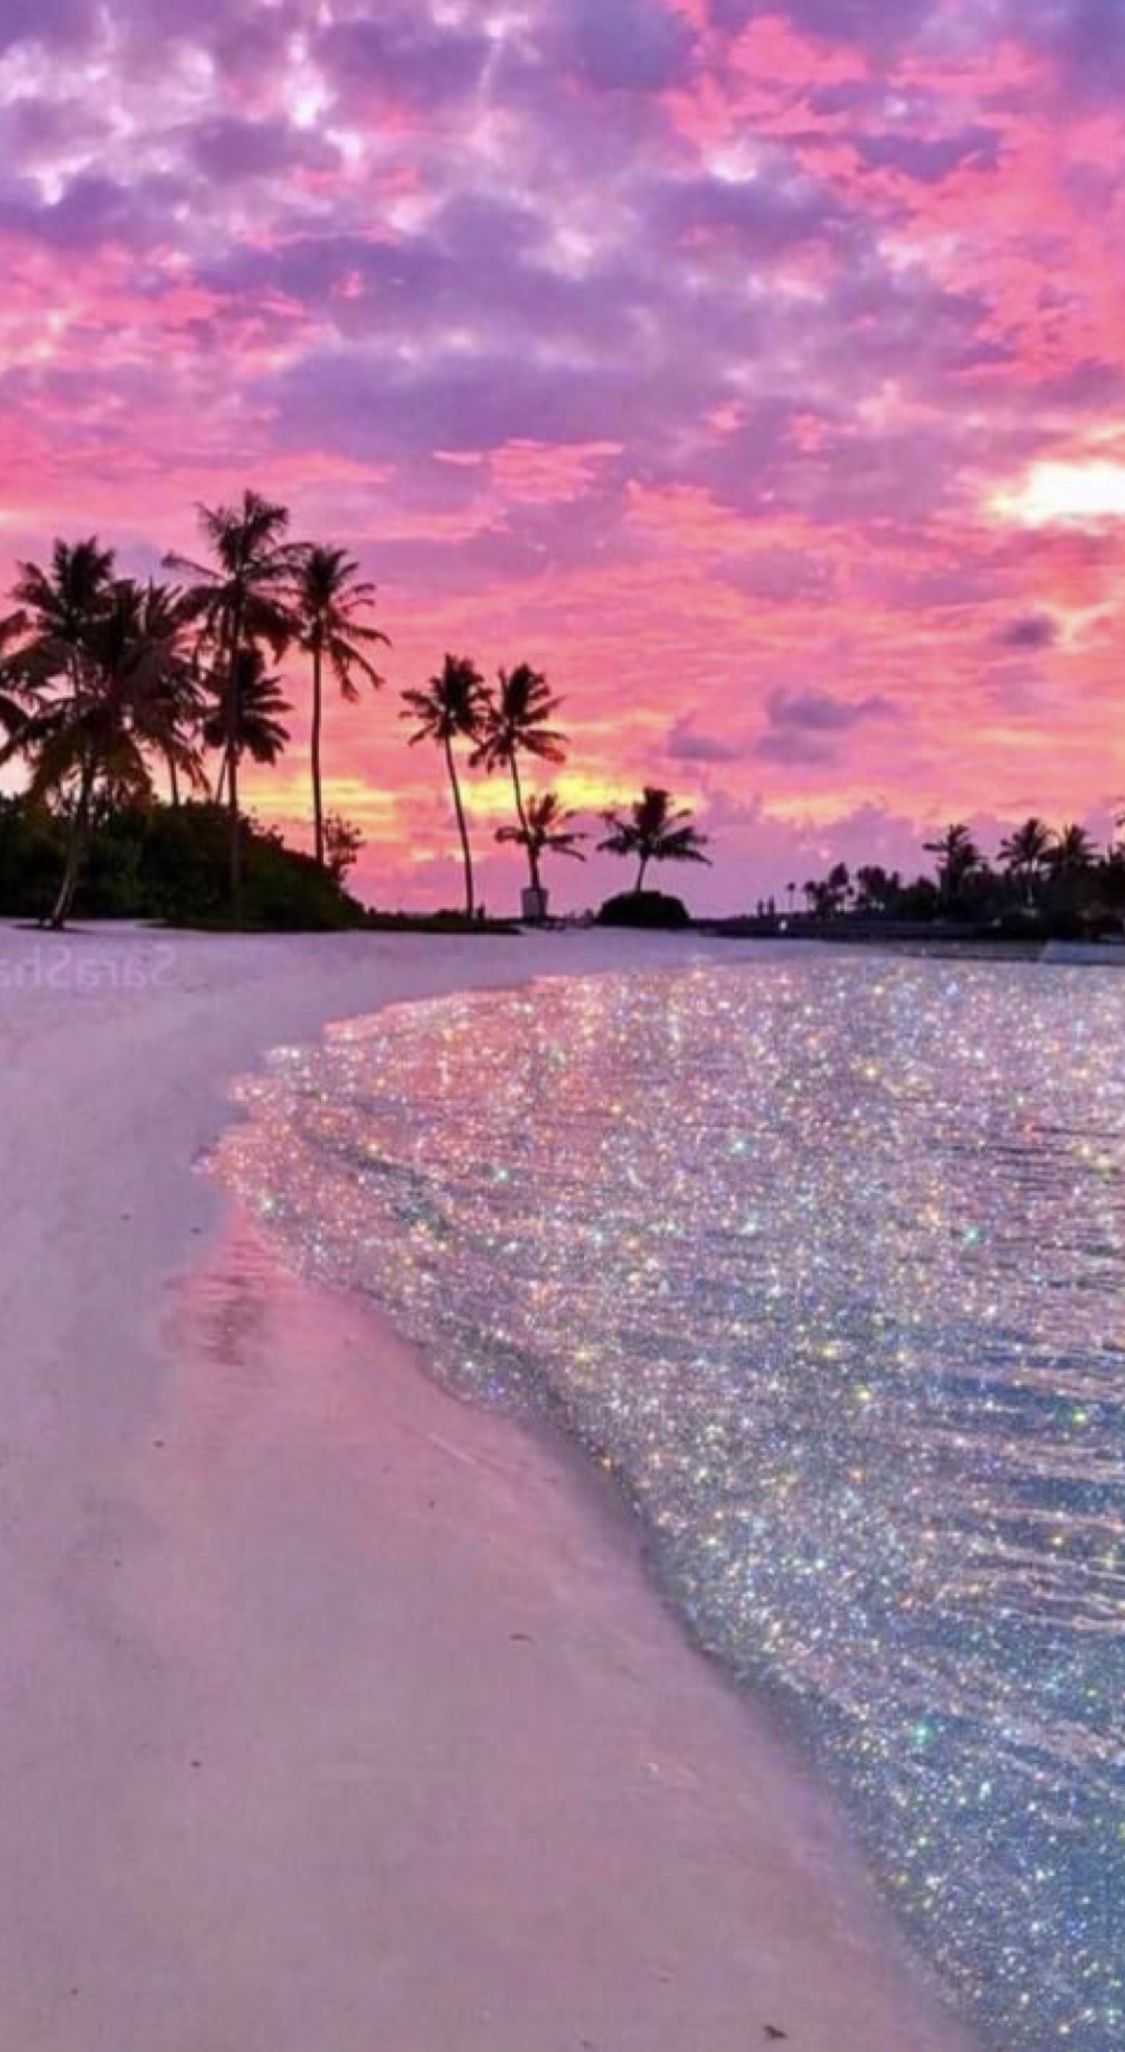 A beach with palm trees and a pink and purple sunset. - Glitter